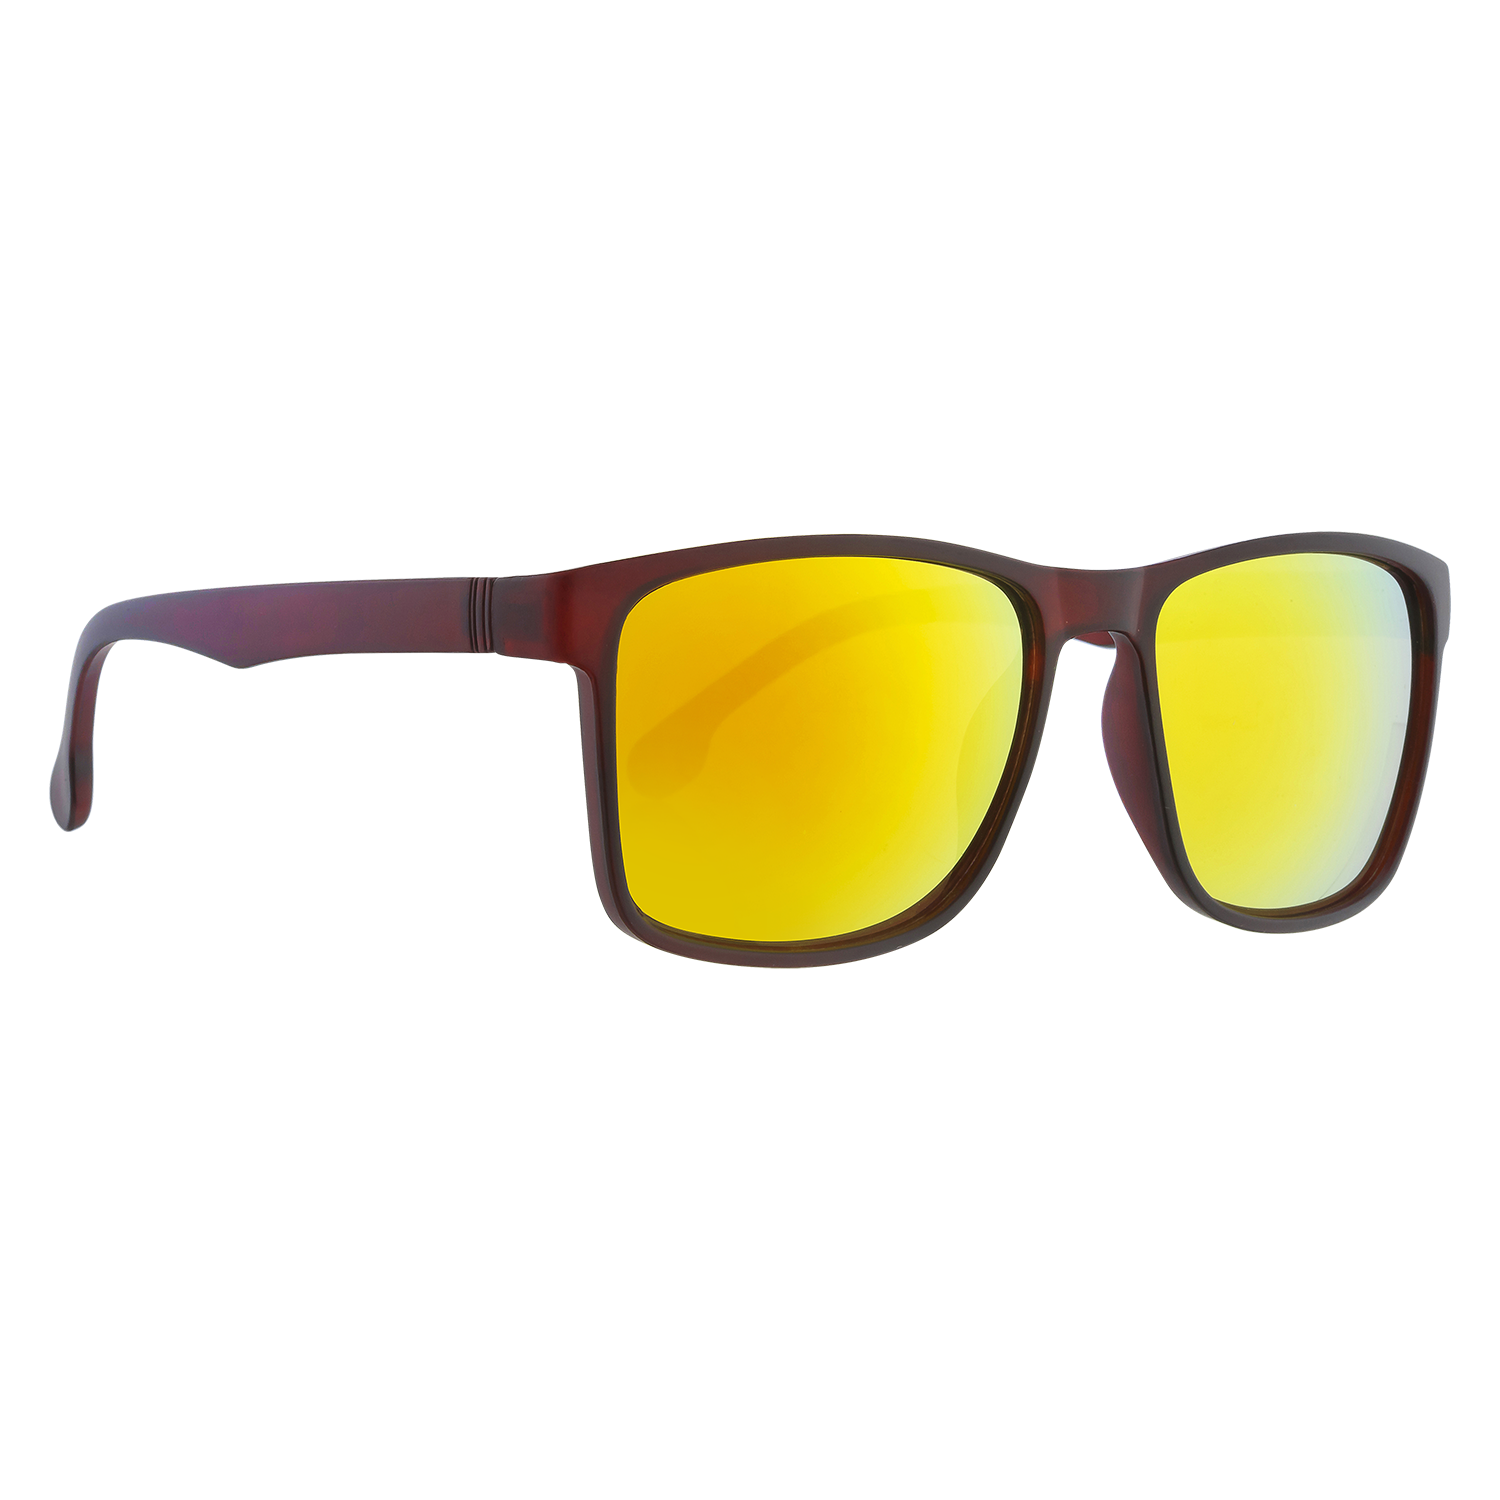 Men's PC Sports Sunglasses (Less than $10 in the store)